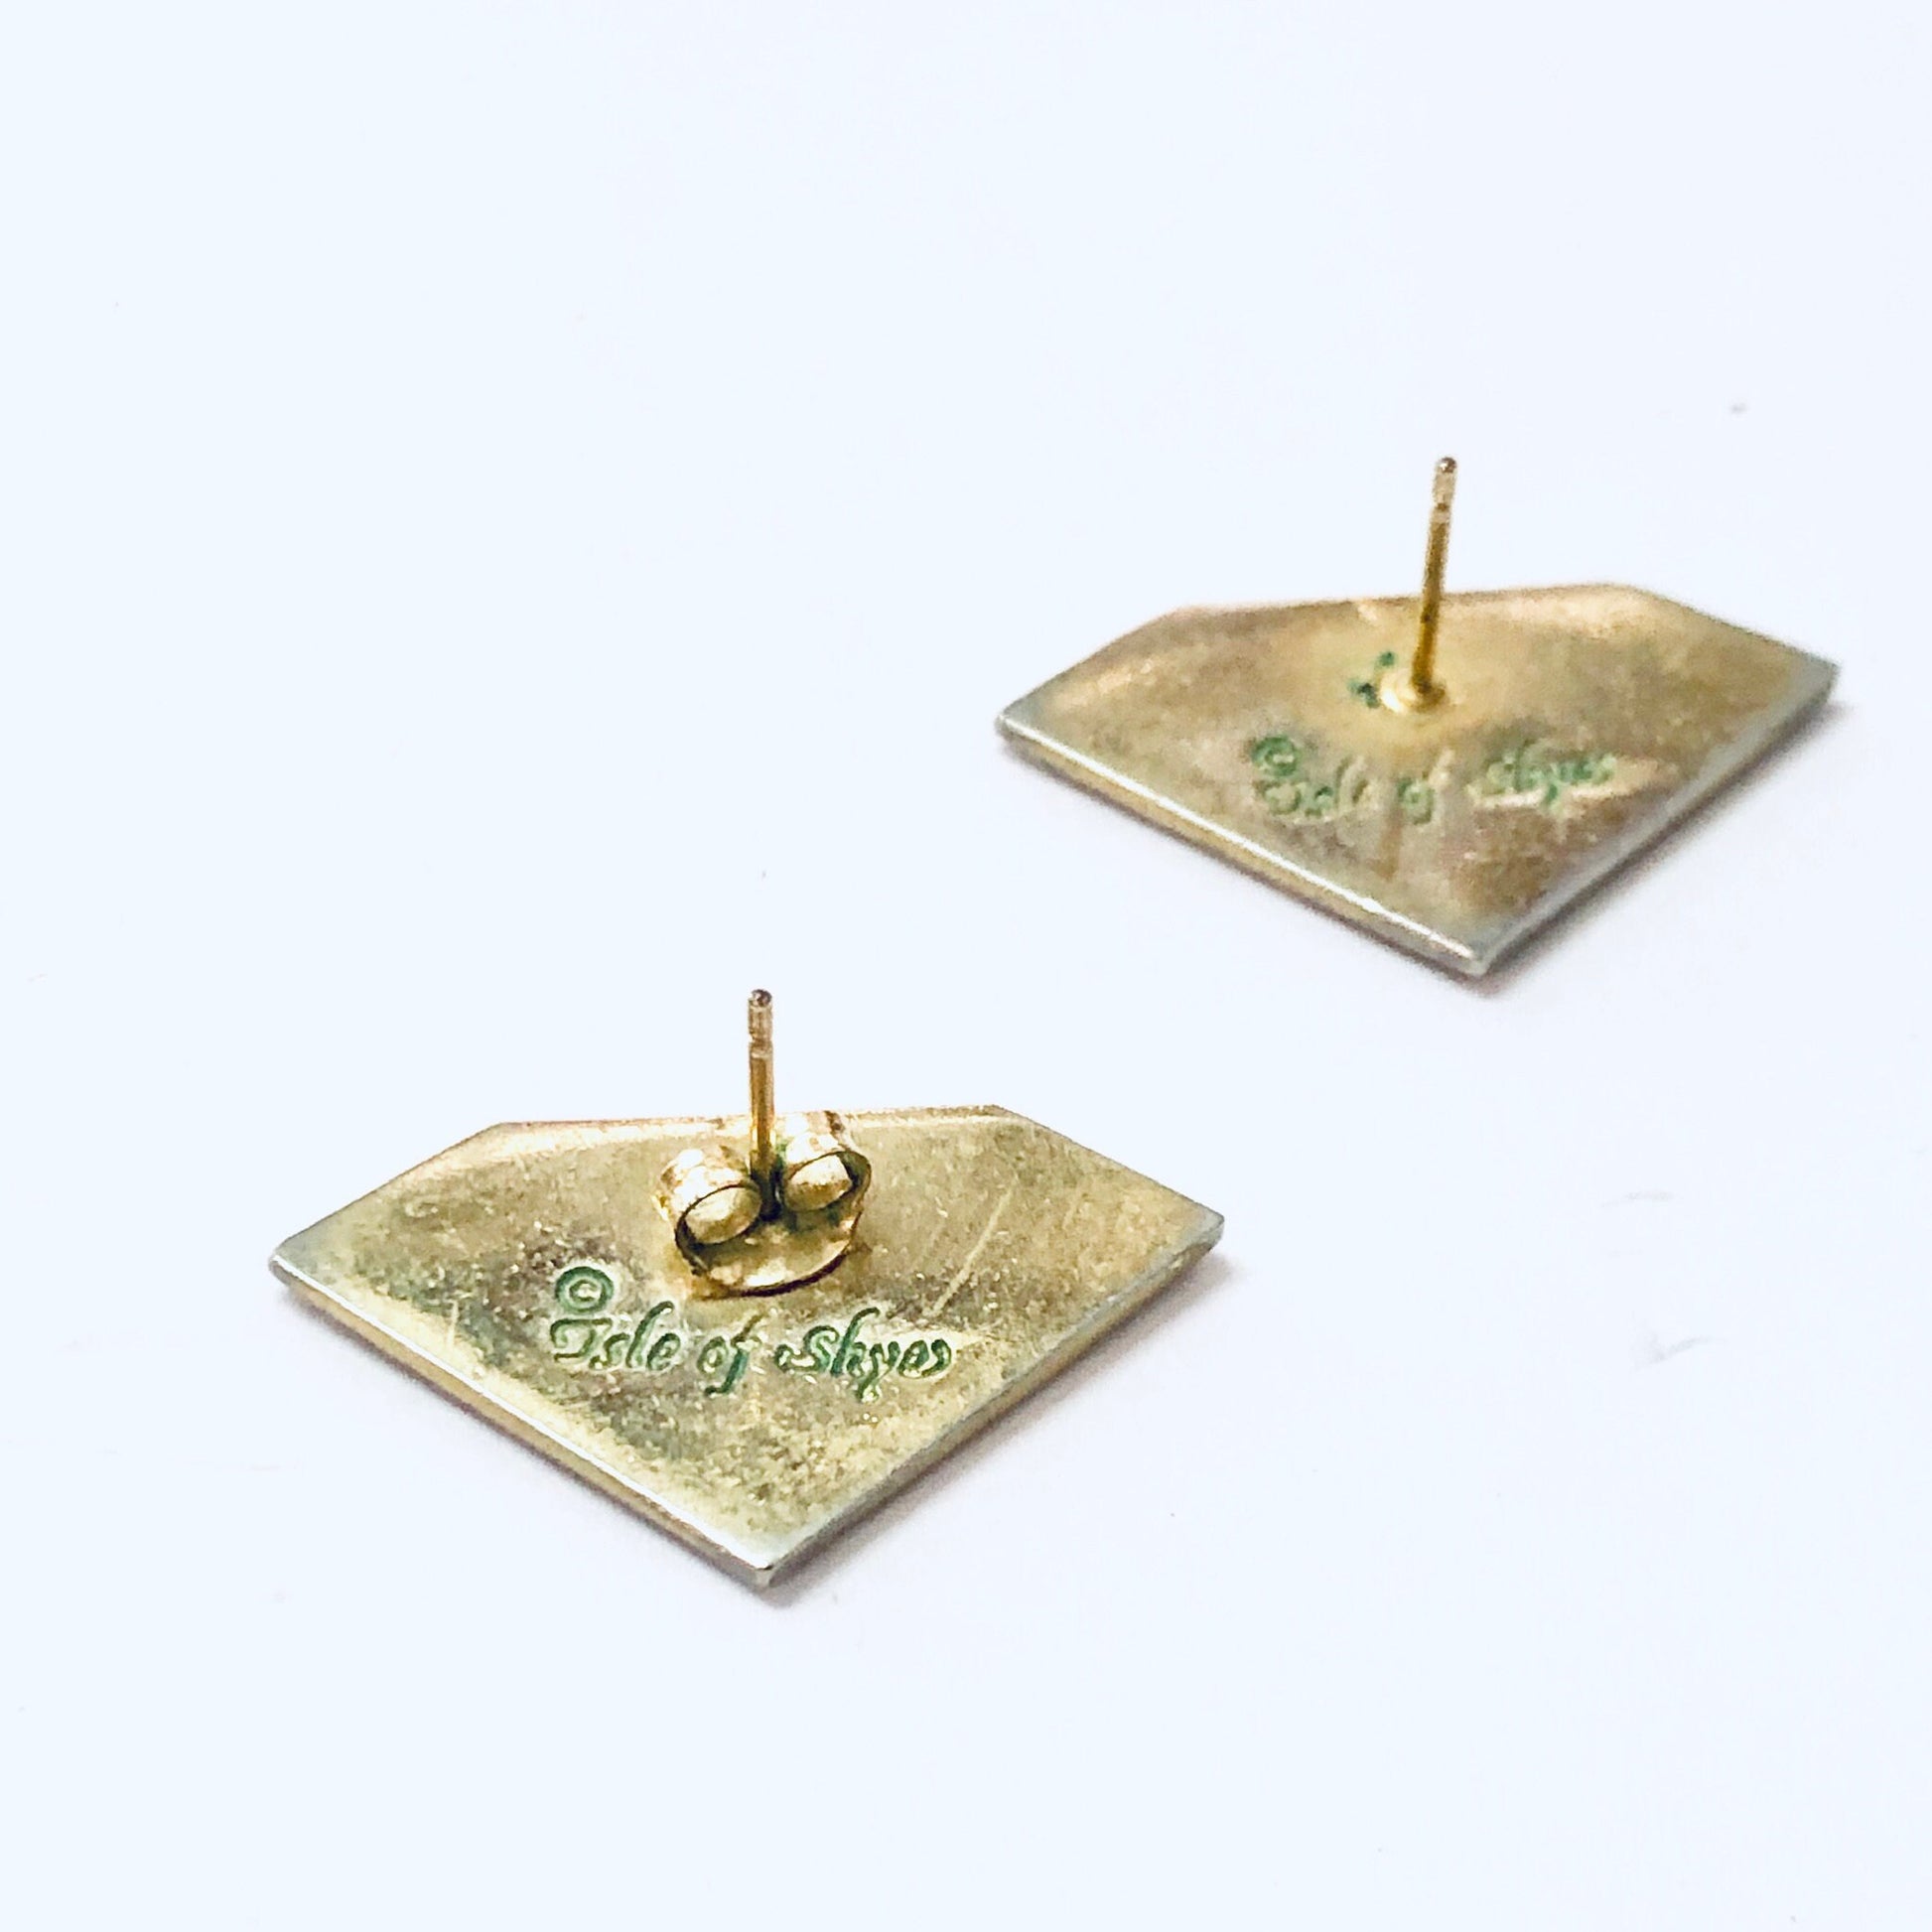 Vintage diamond-shaped souvenir earrings from Isle of Skye with "Isle of Skye" text and green specks, on pierced posts, isolated on white background